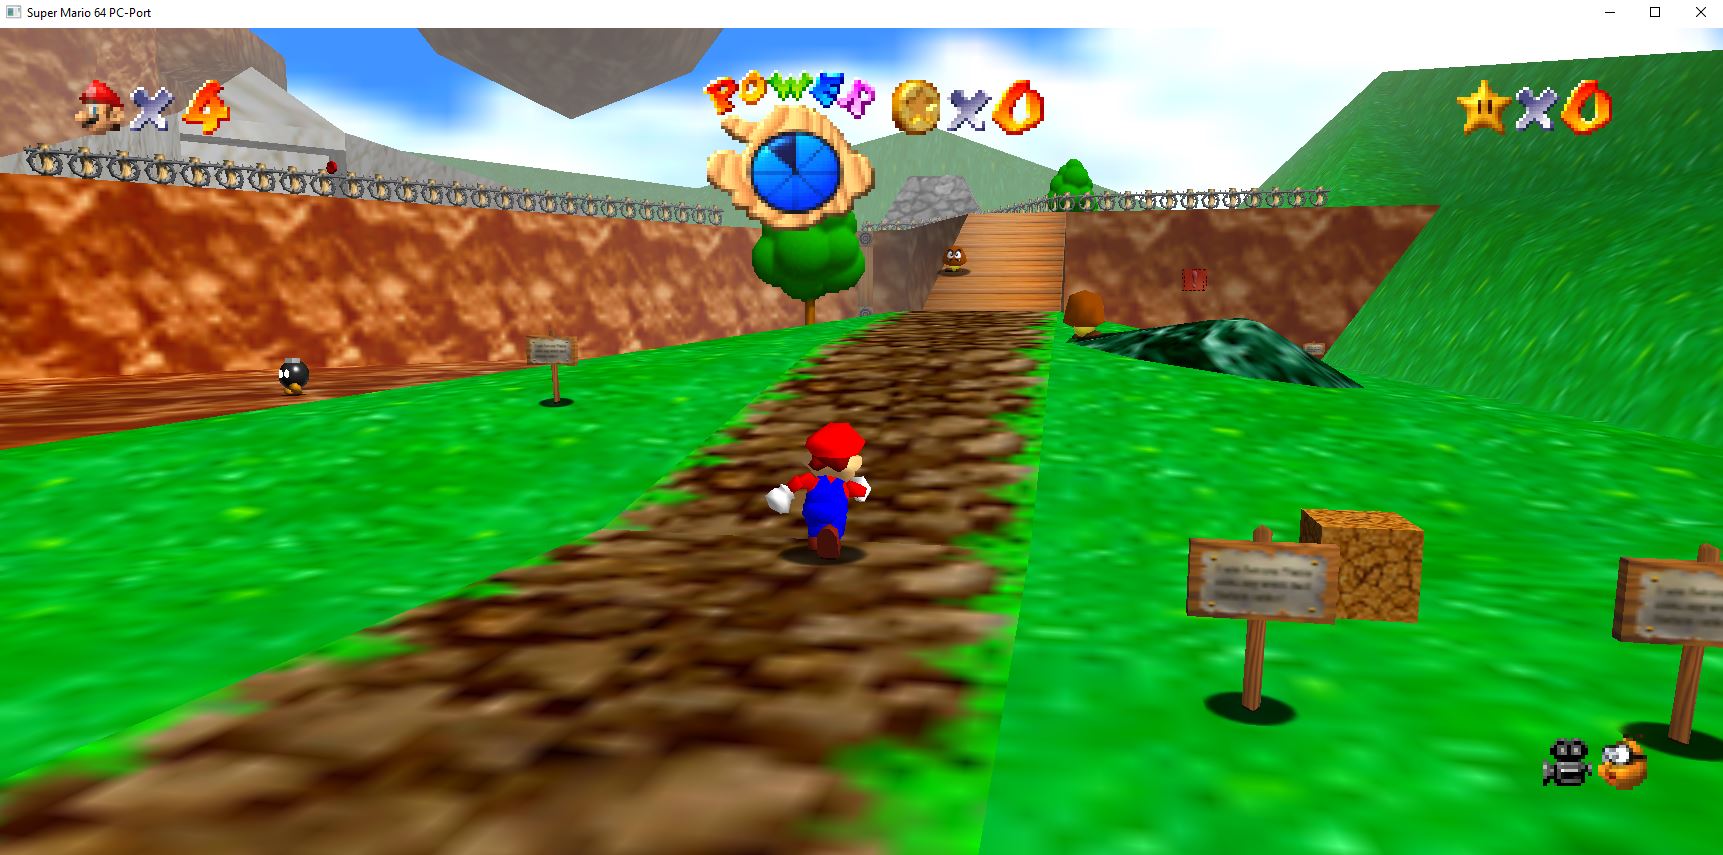 A Fully Functioning Mario 64 Pc Port Has Been Released Vgc